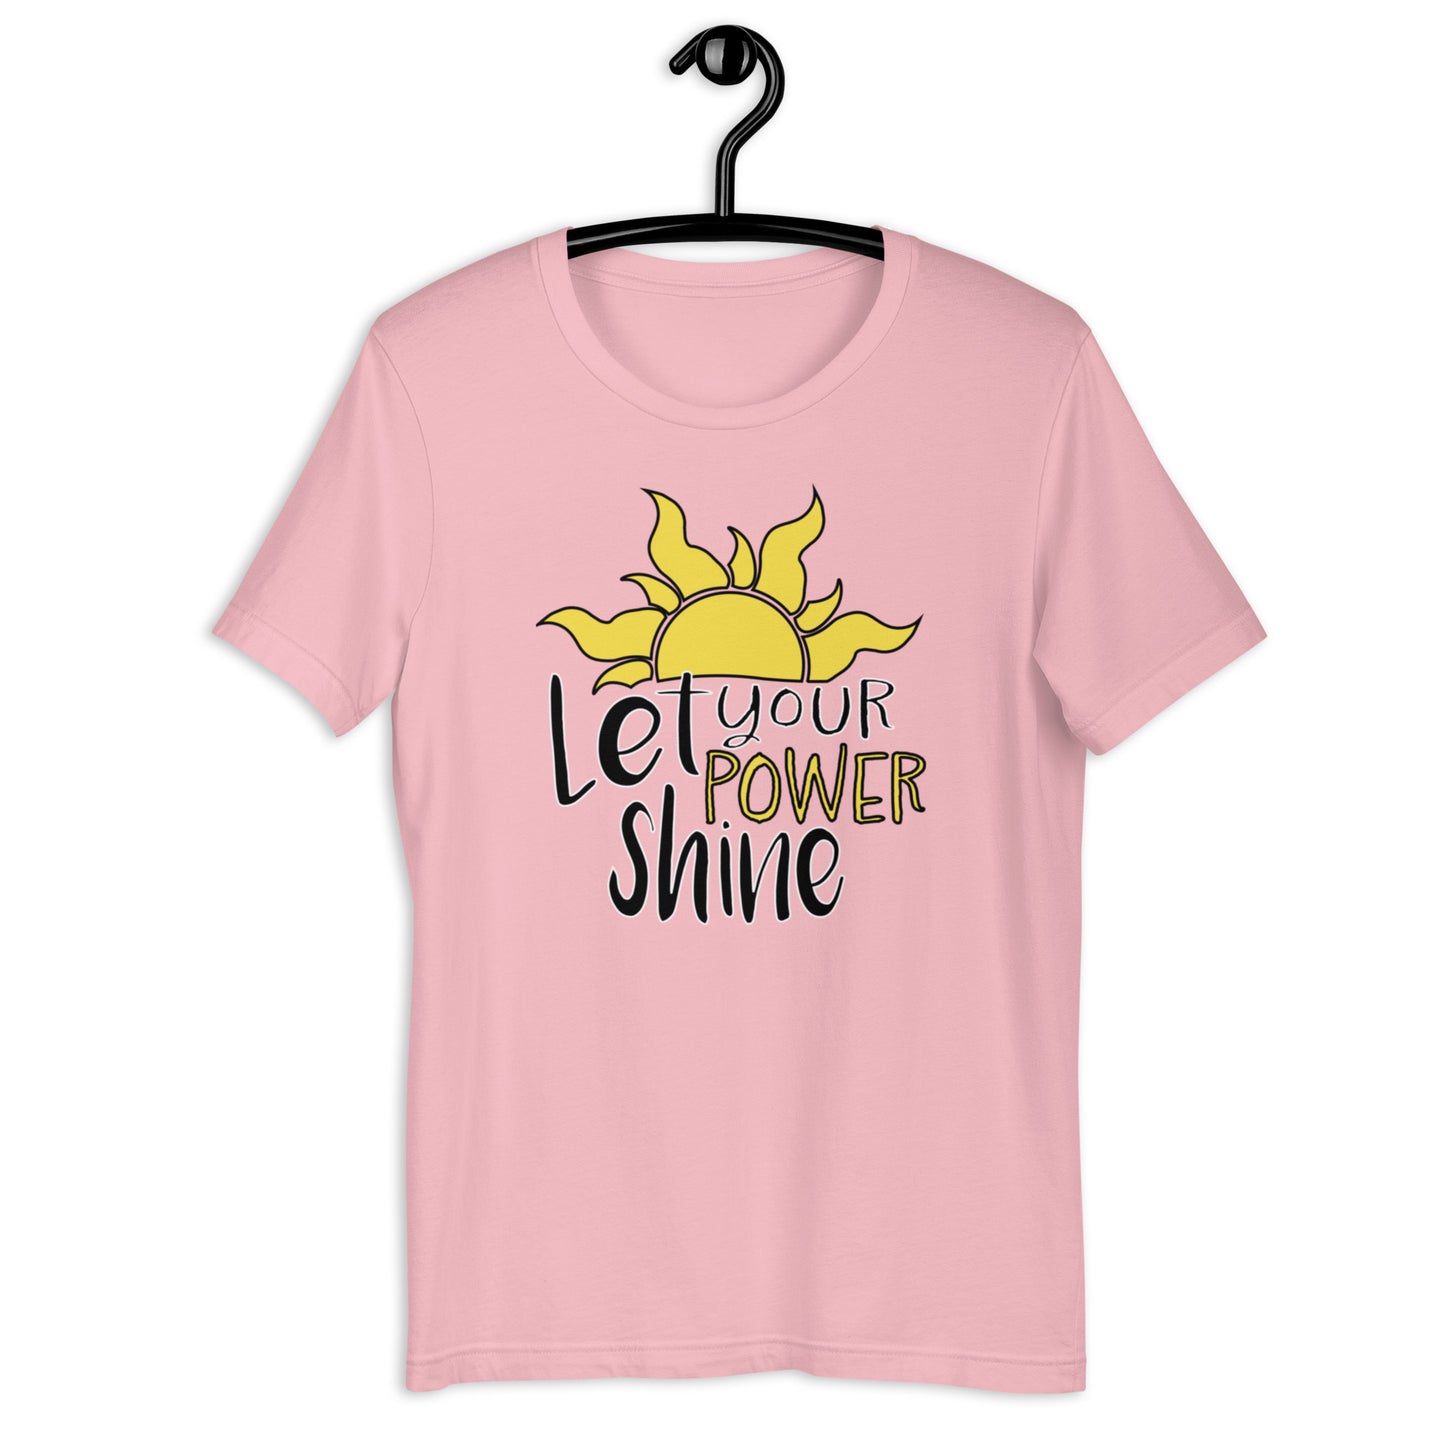 Let Your Power Shine Tee - Adult Unisex